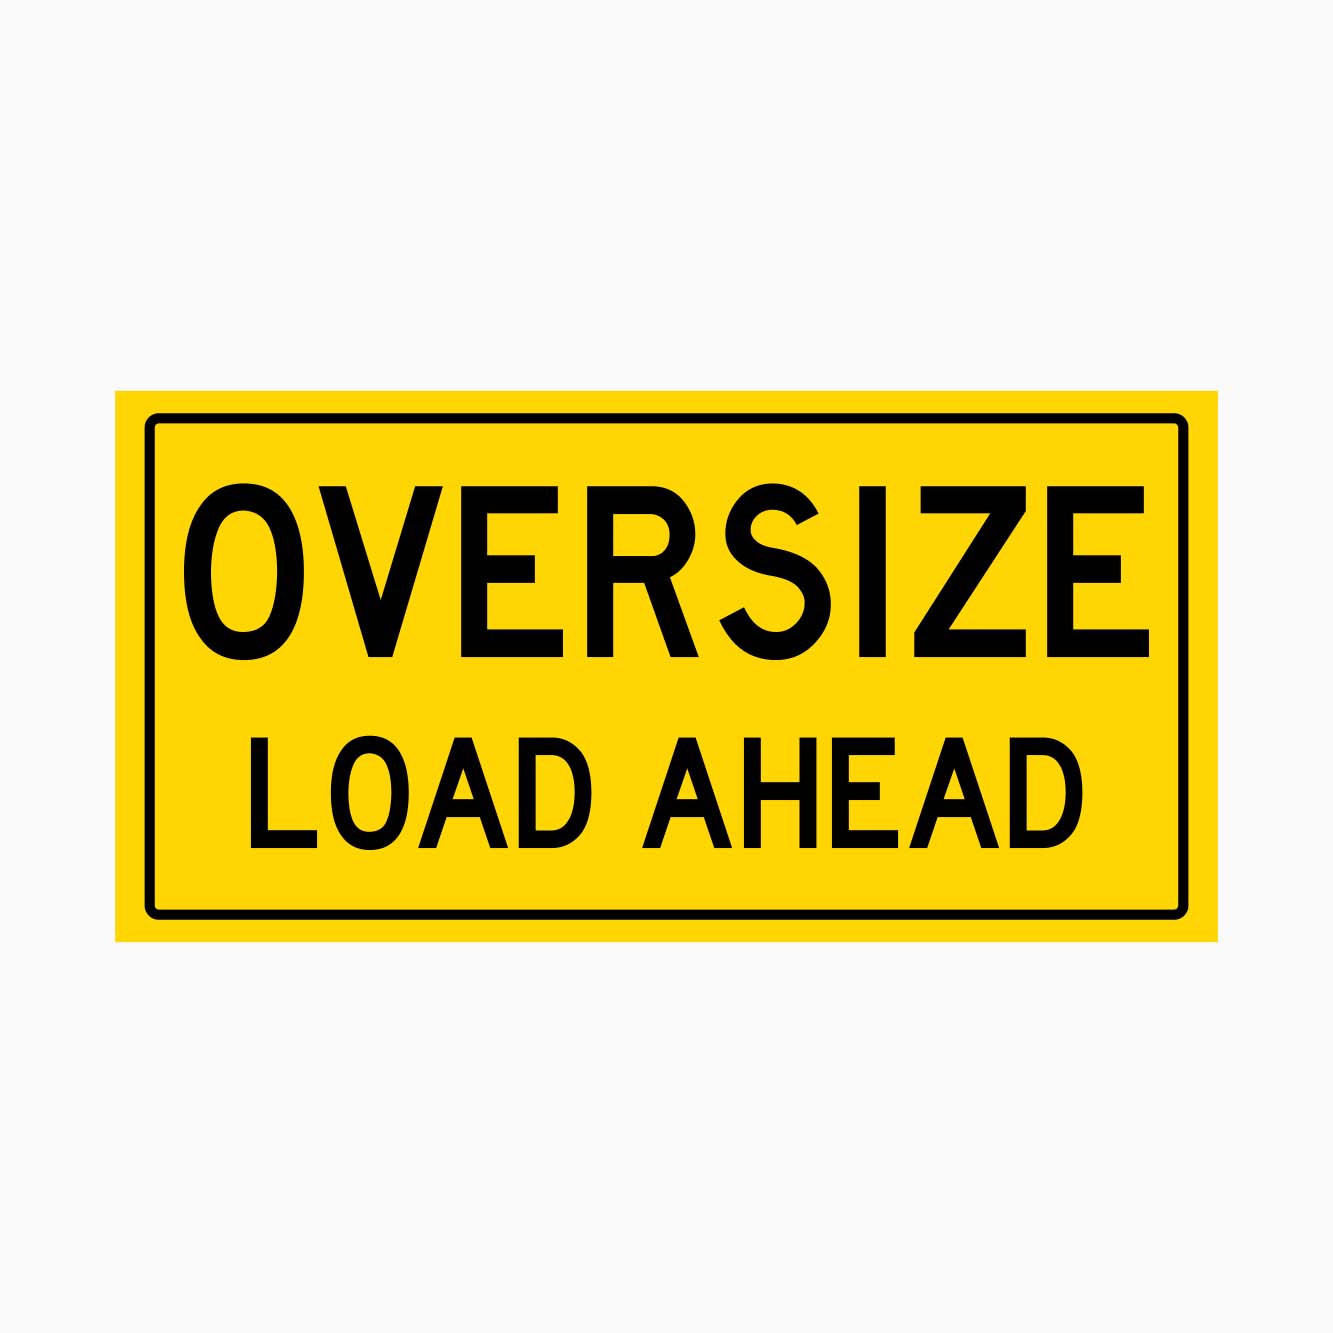 OVERSIZE LOAD AHEAD SIGN - GET SIGNS